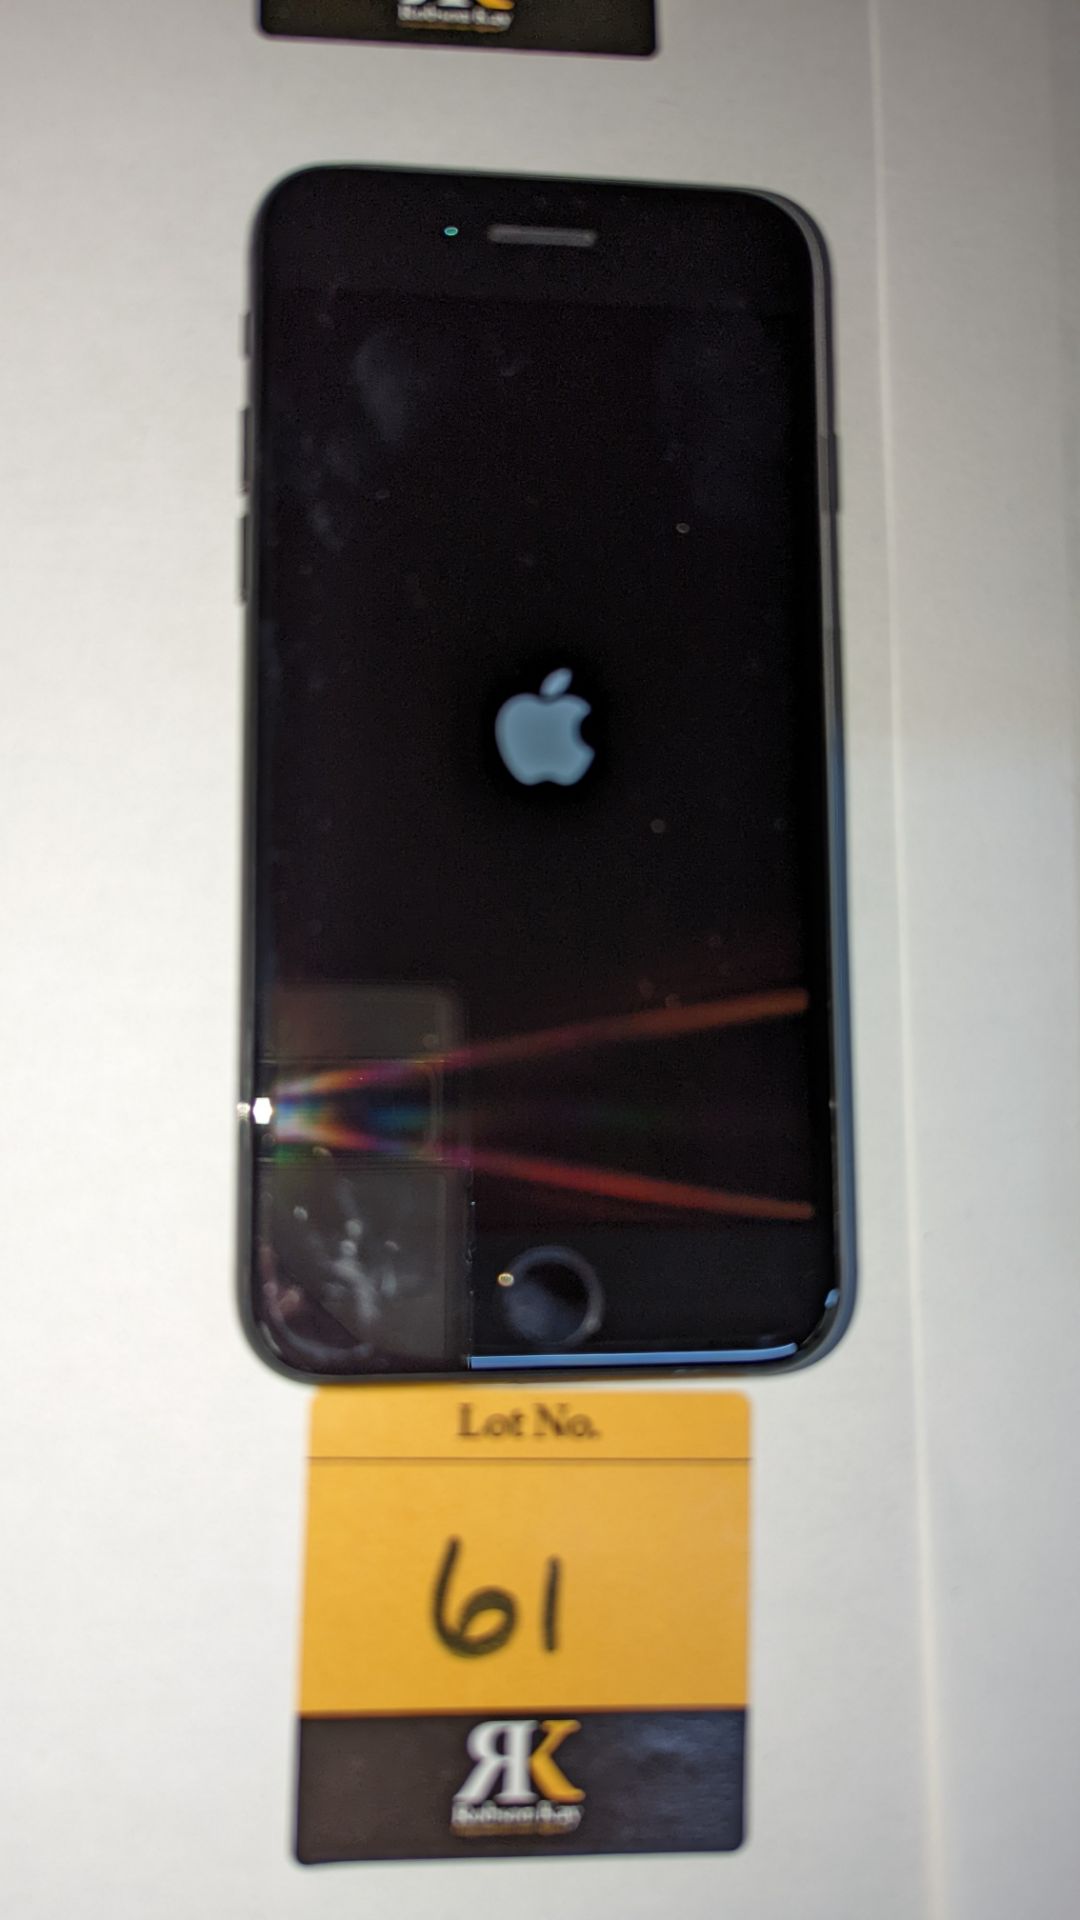 Apple iPhone 7, 32GB capacity, model A1778. No ancillaries or accessories - Image 10 of 12